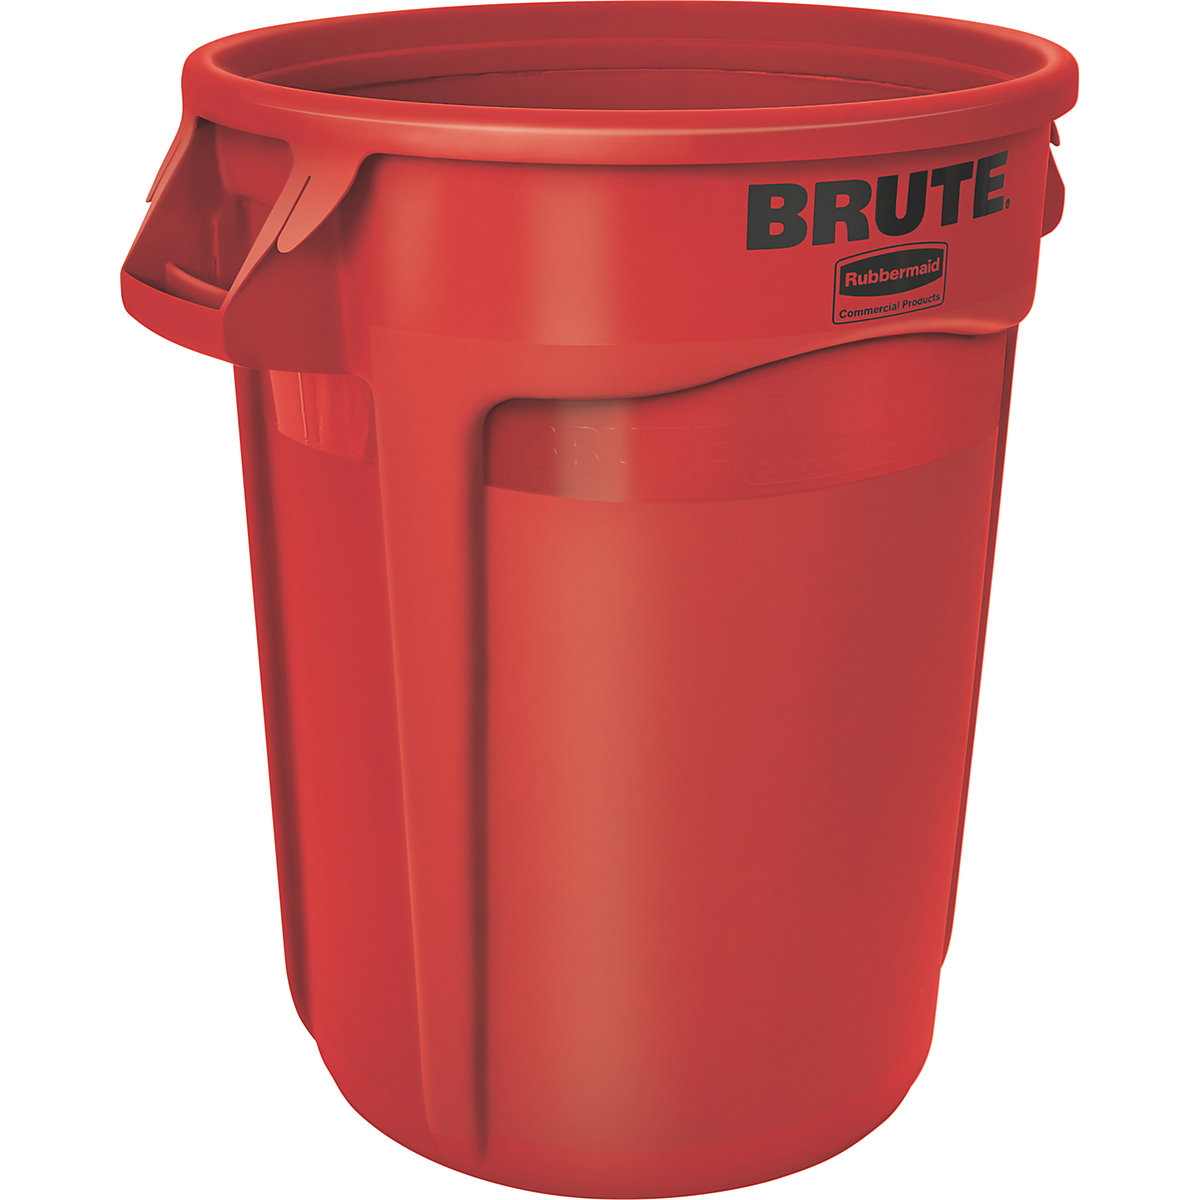 BRUTE® universal container, round – Rubbermaid, capacity 121 l, red-14